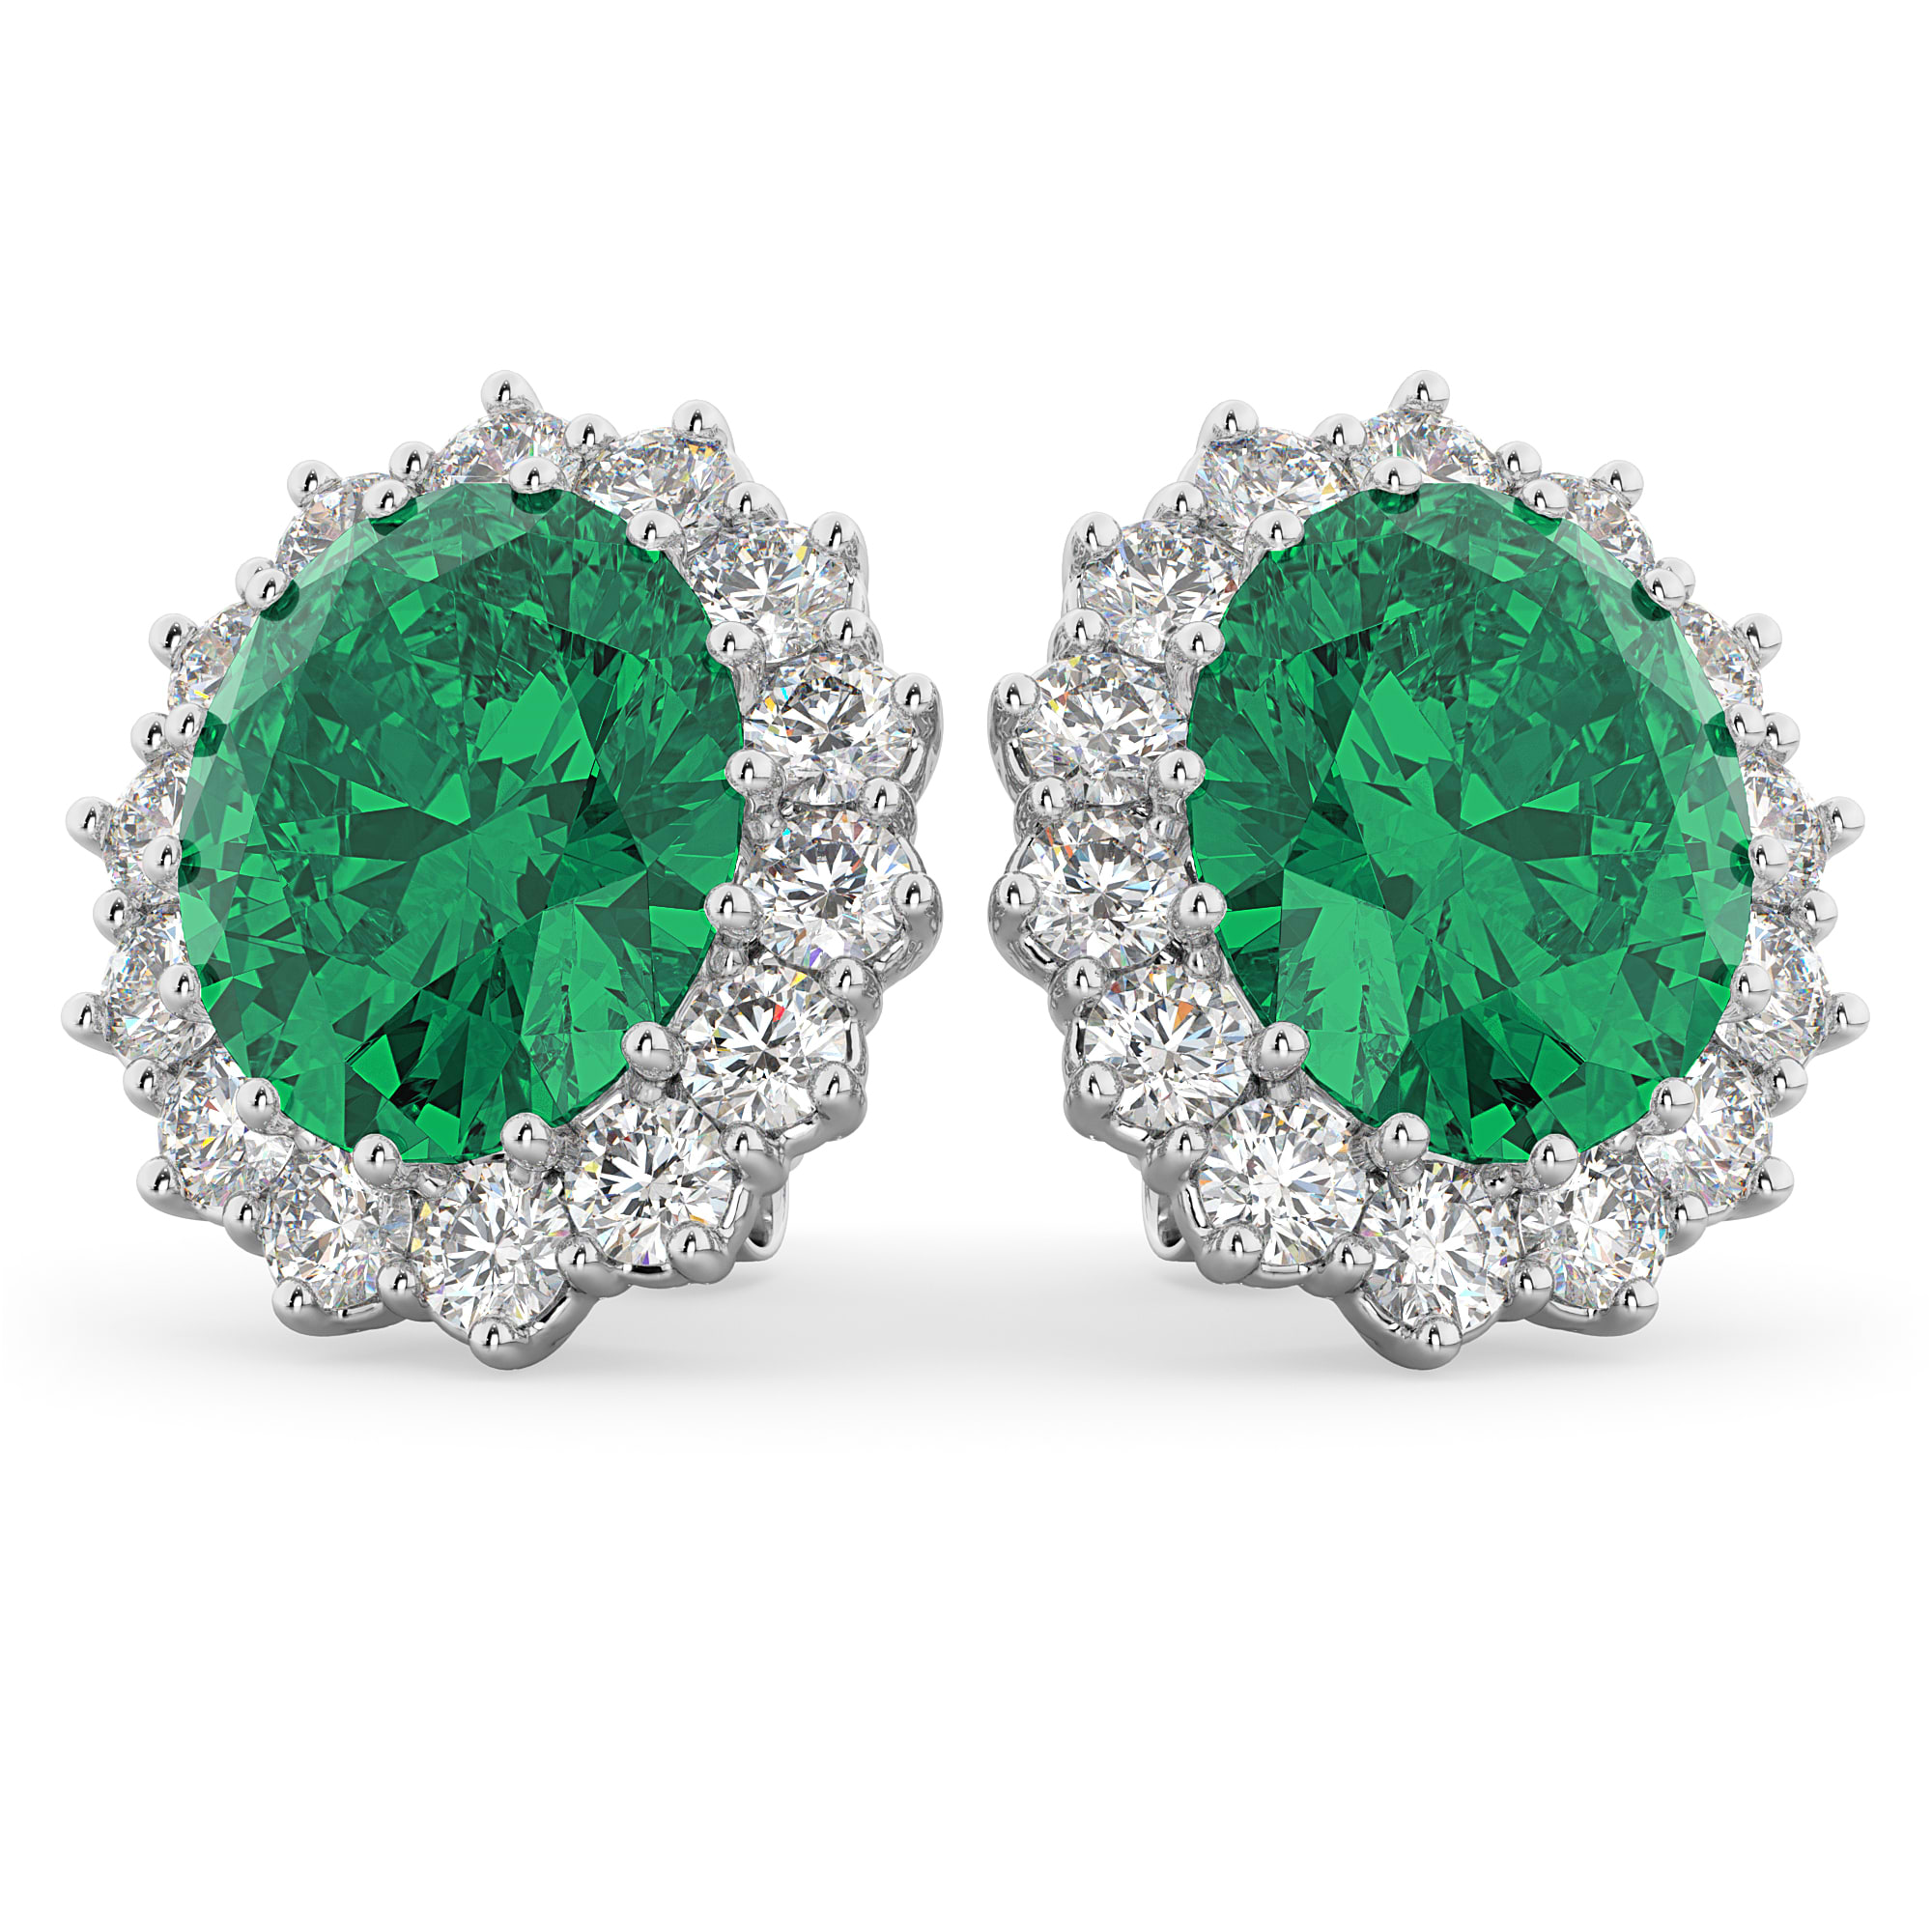 Oval Emerald and Diamond Earrings 14k White Gold (10.80ctw)